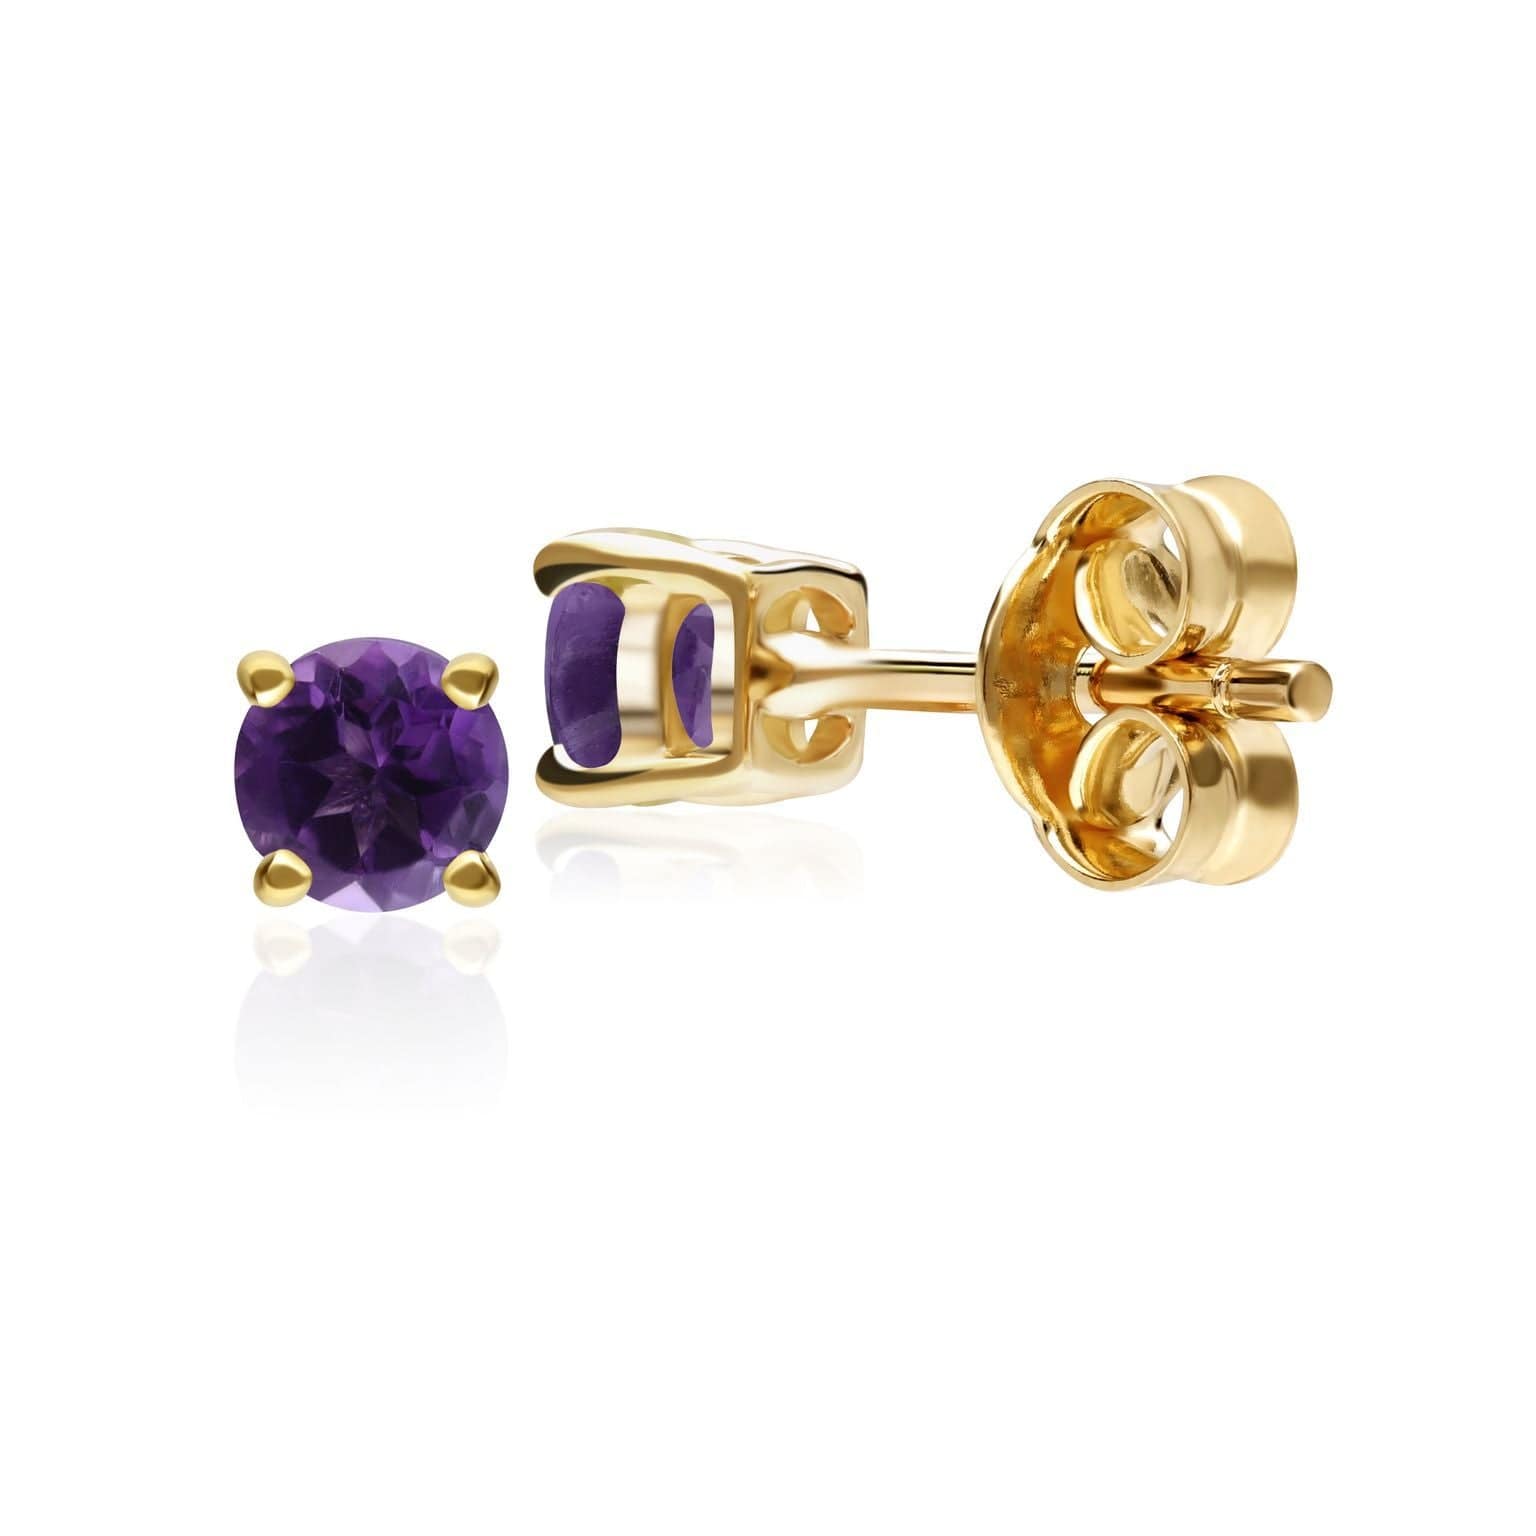 Classic Round Amethyst Stud Earrings in 9ct Yellow Gold - Gemondo